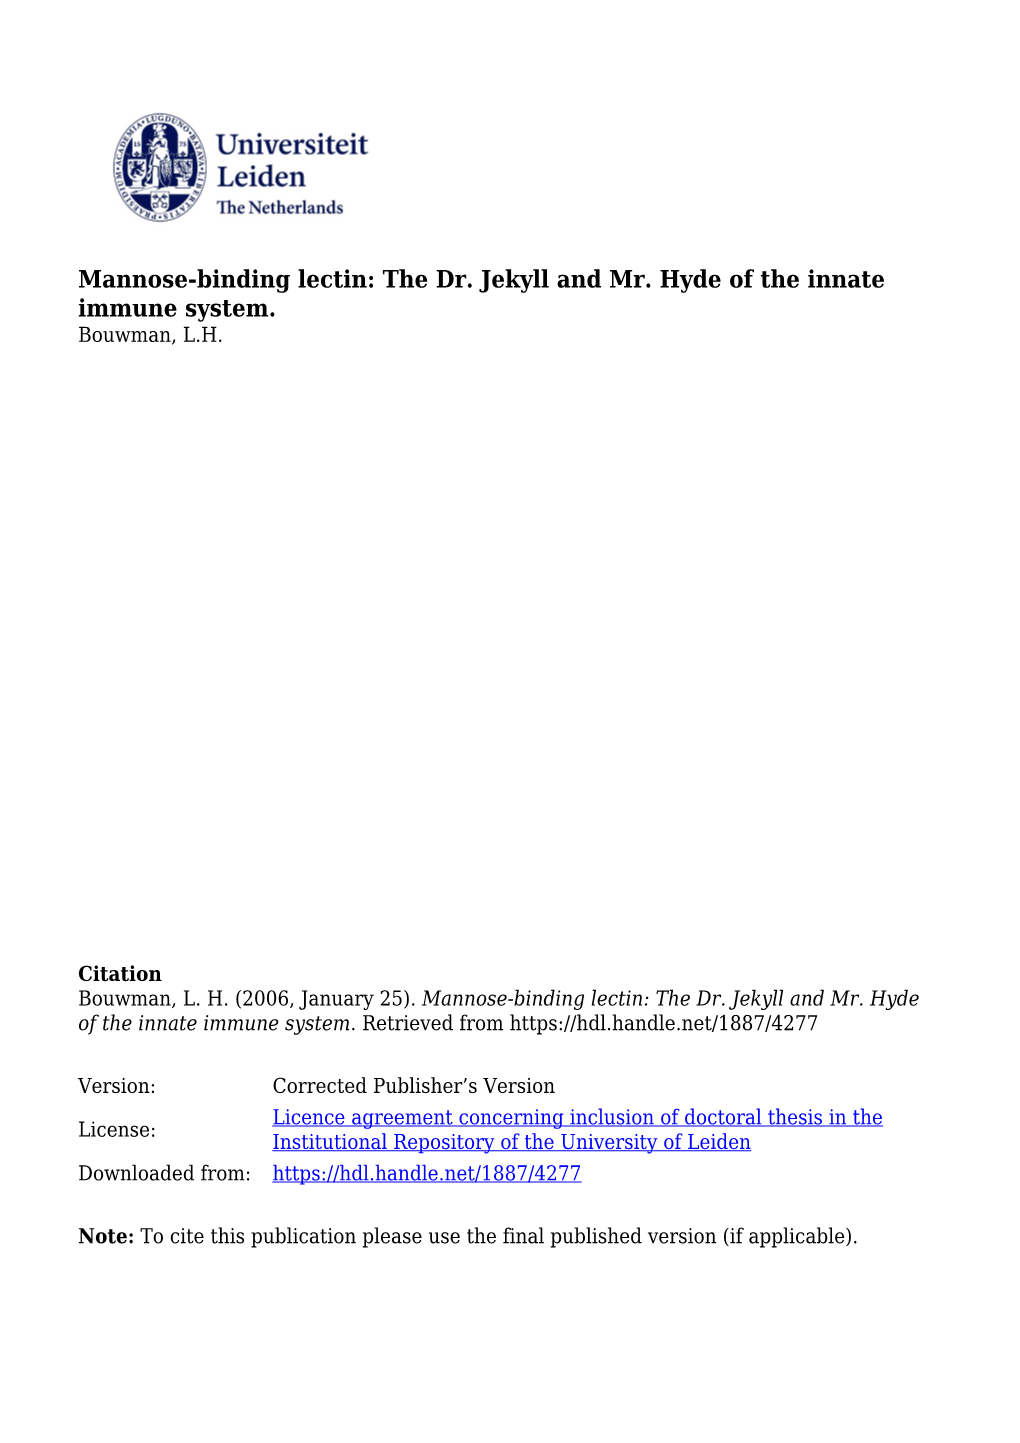 Mannose-Binding Lectin: the Dr. Jekyll and Mr. Hyde of the Innate Immune System